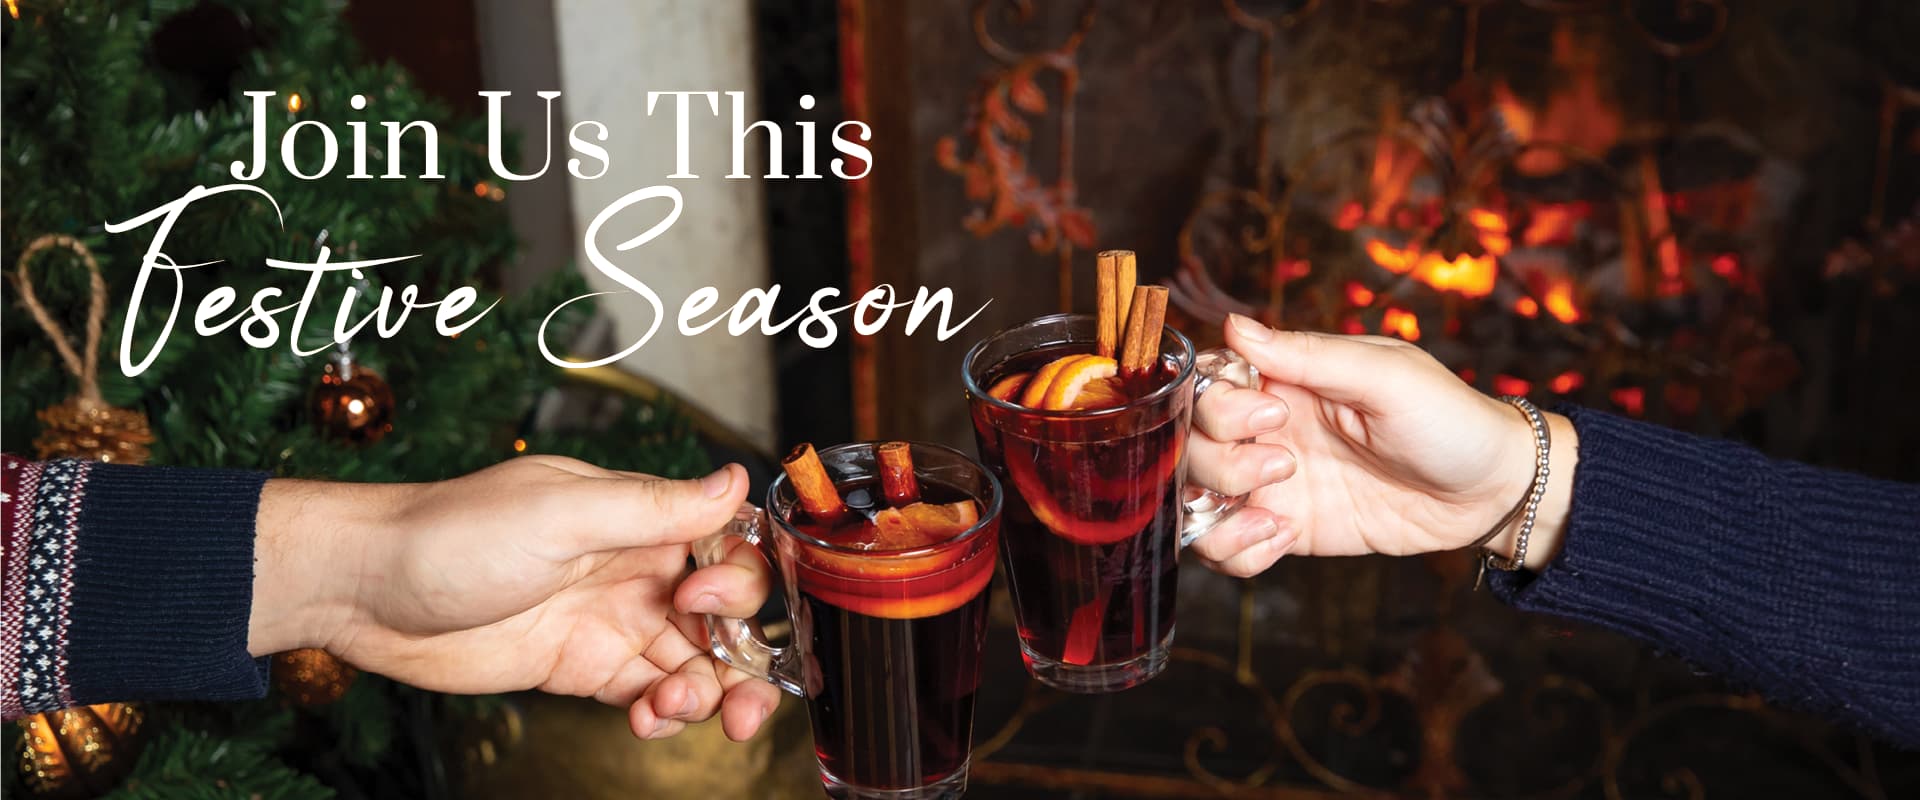 join us this festive season at The Alexander Hay | Mulled Wine